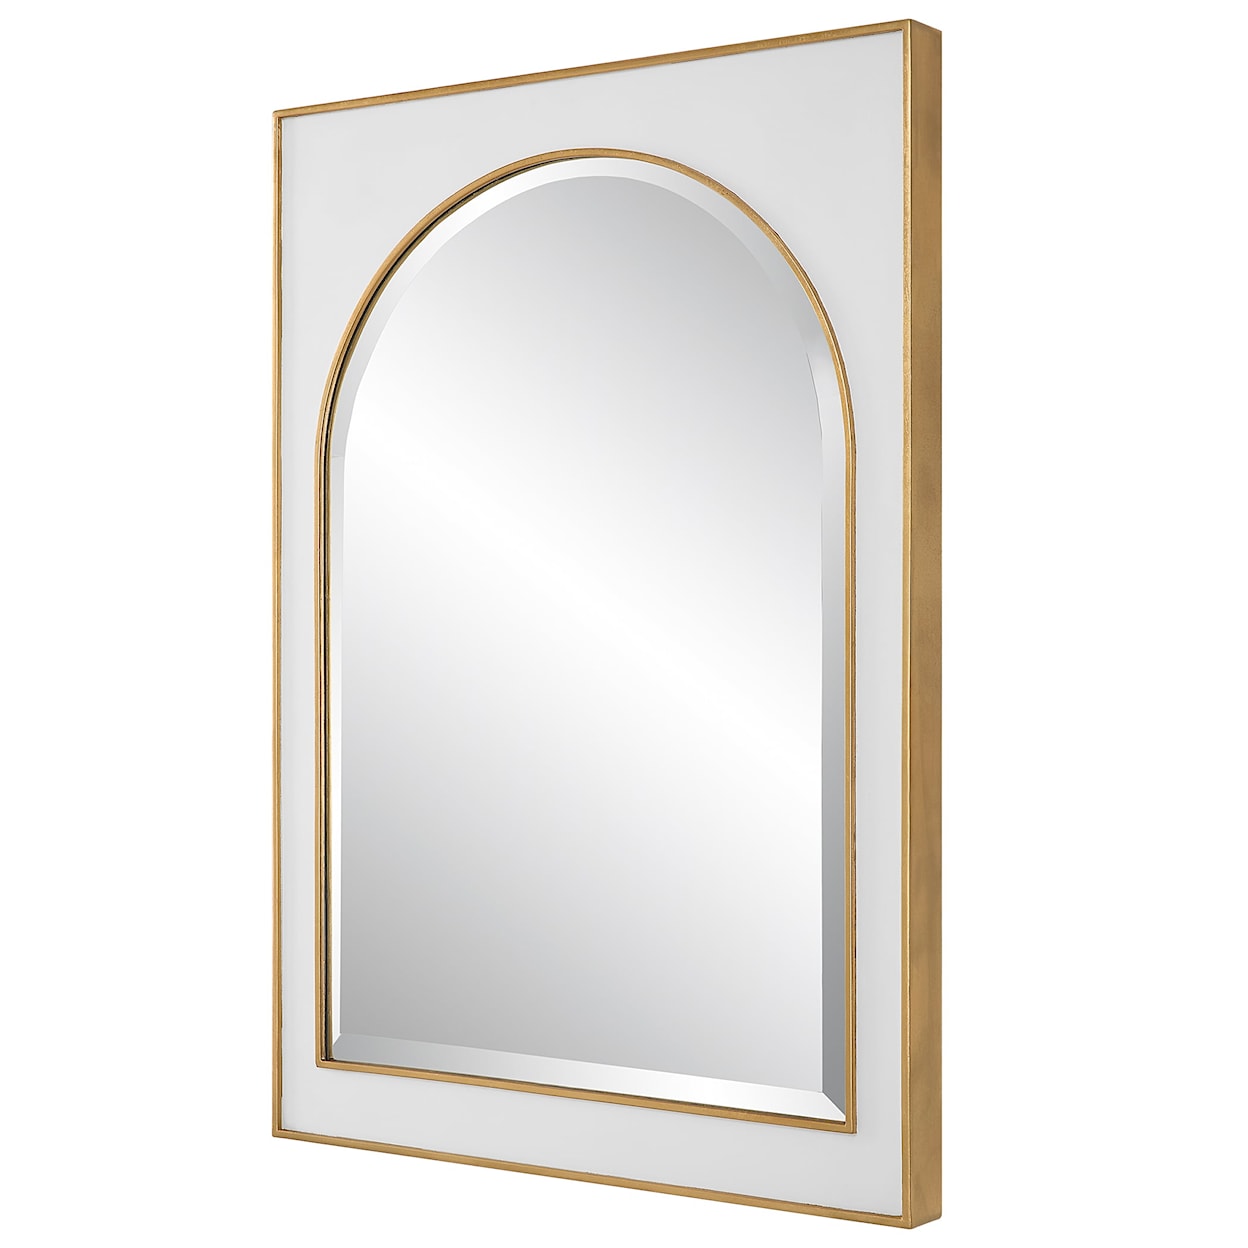 Uttermost Crisanta White Gloss Arched Mirror